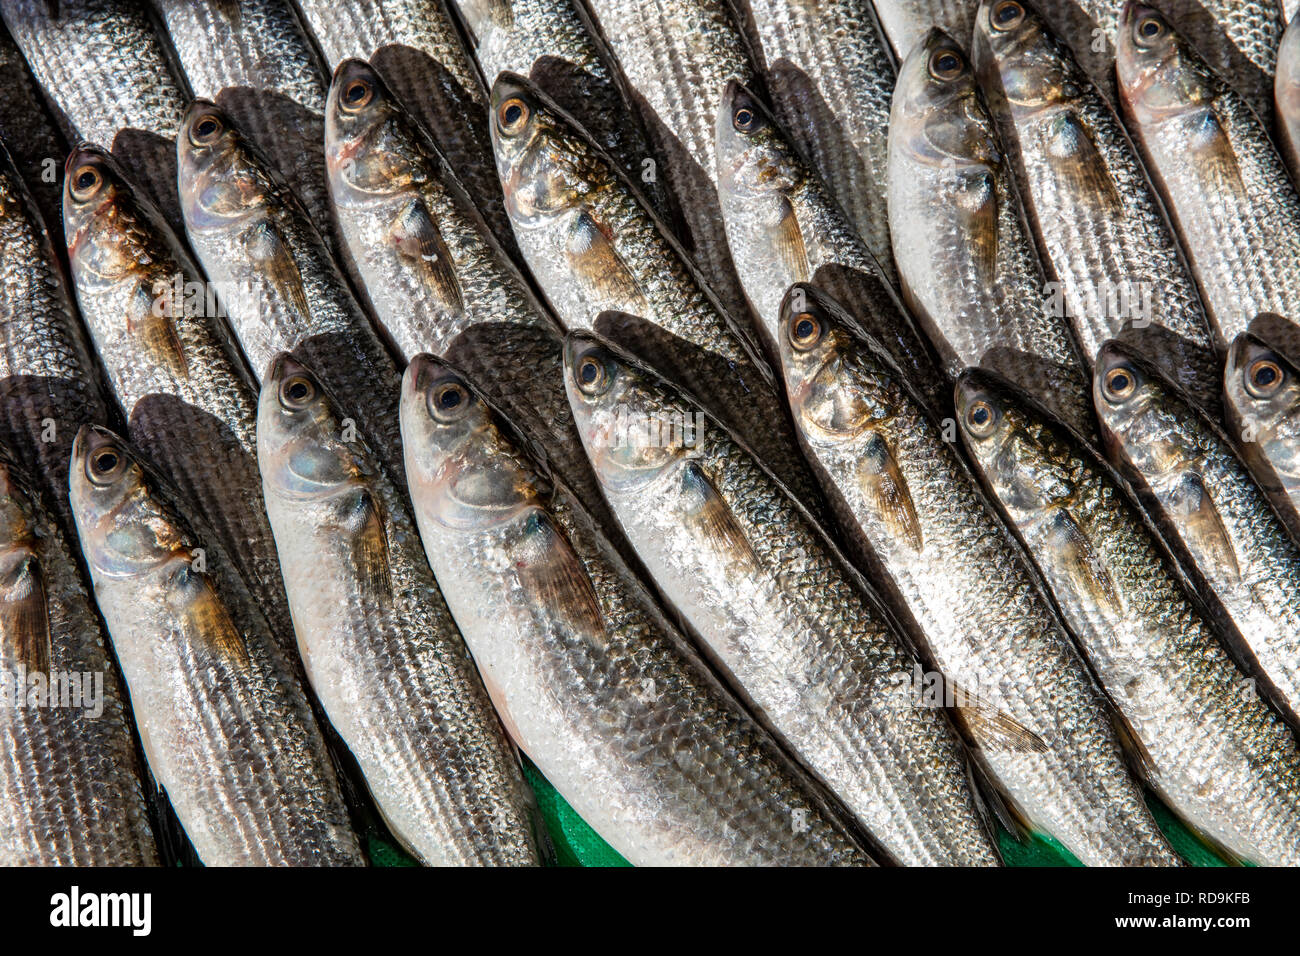 Fresh Mugil On Display On Ice On Fishermen Market Store Shop. Mugil Is A Genus Of Mullet In The Family Mugilidae. Seafood Fish Background. Stock Photo